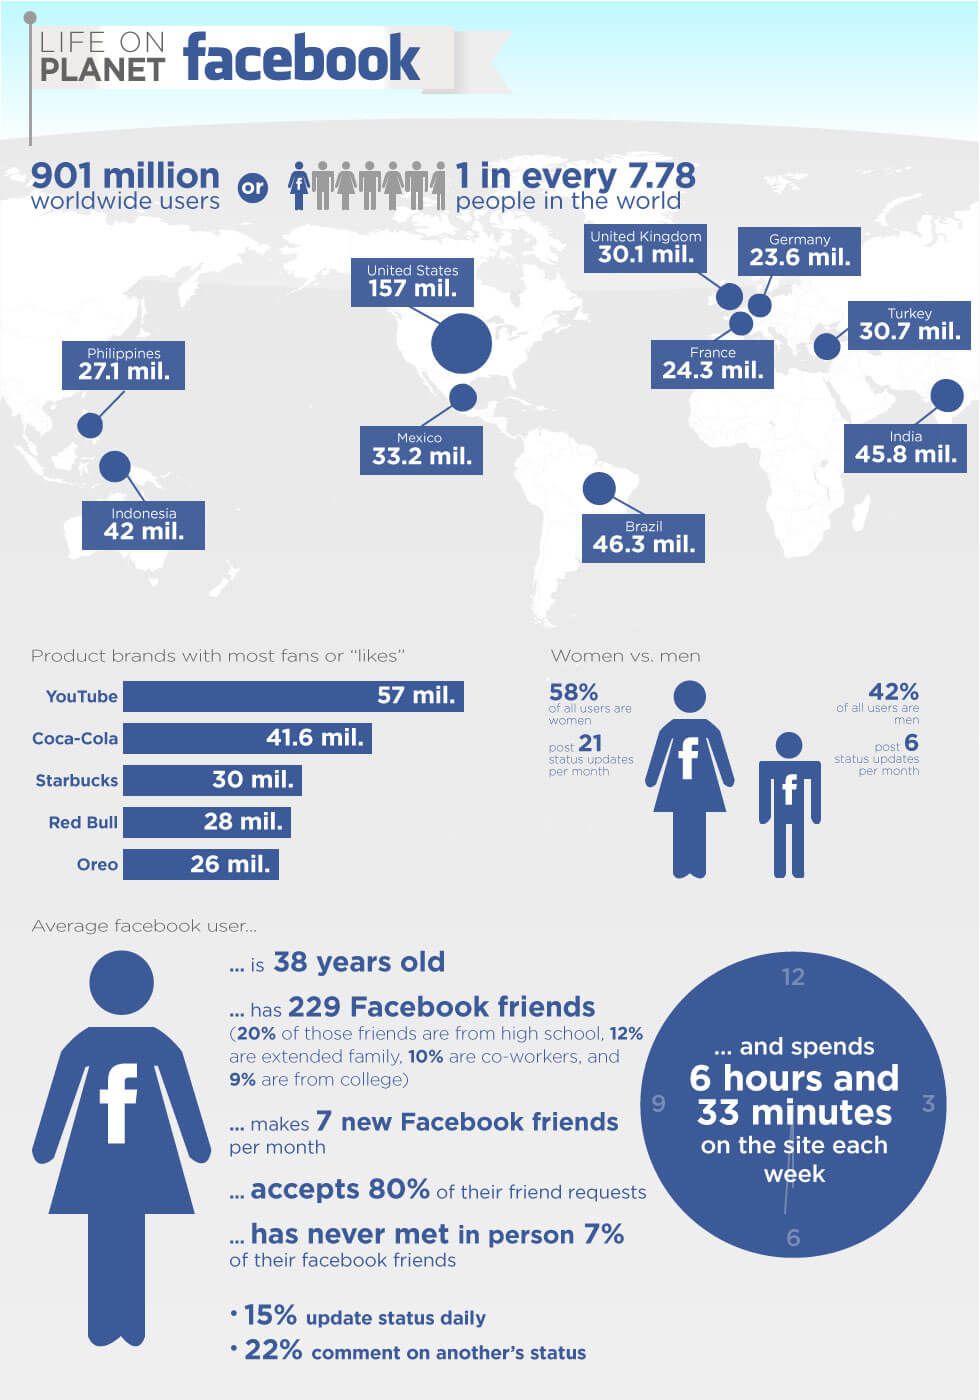 How To Help People Find Your Business On Facebook [Infographic] | Bit Rebels